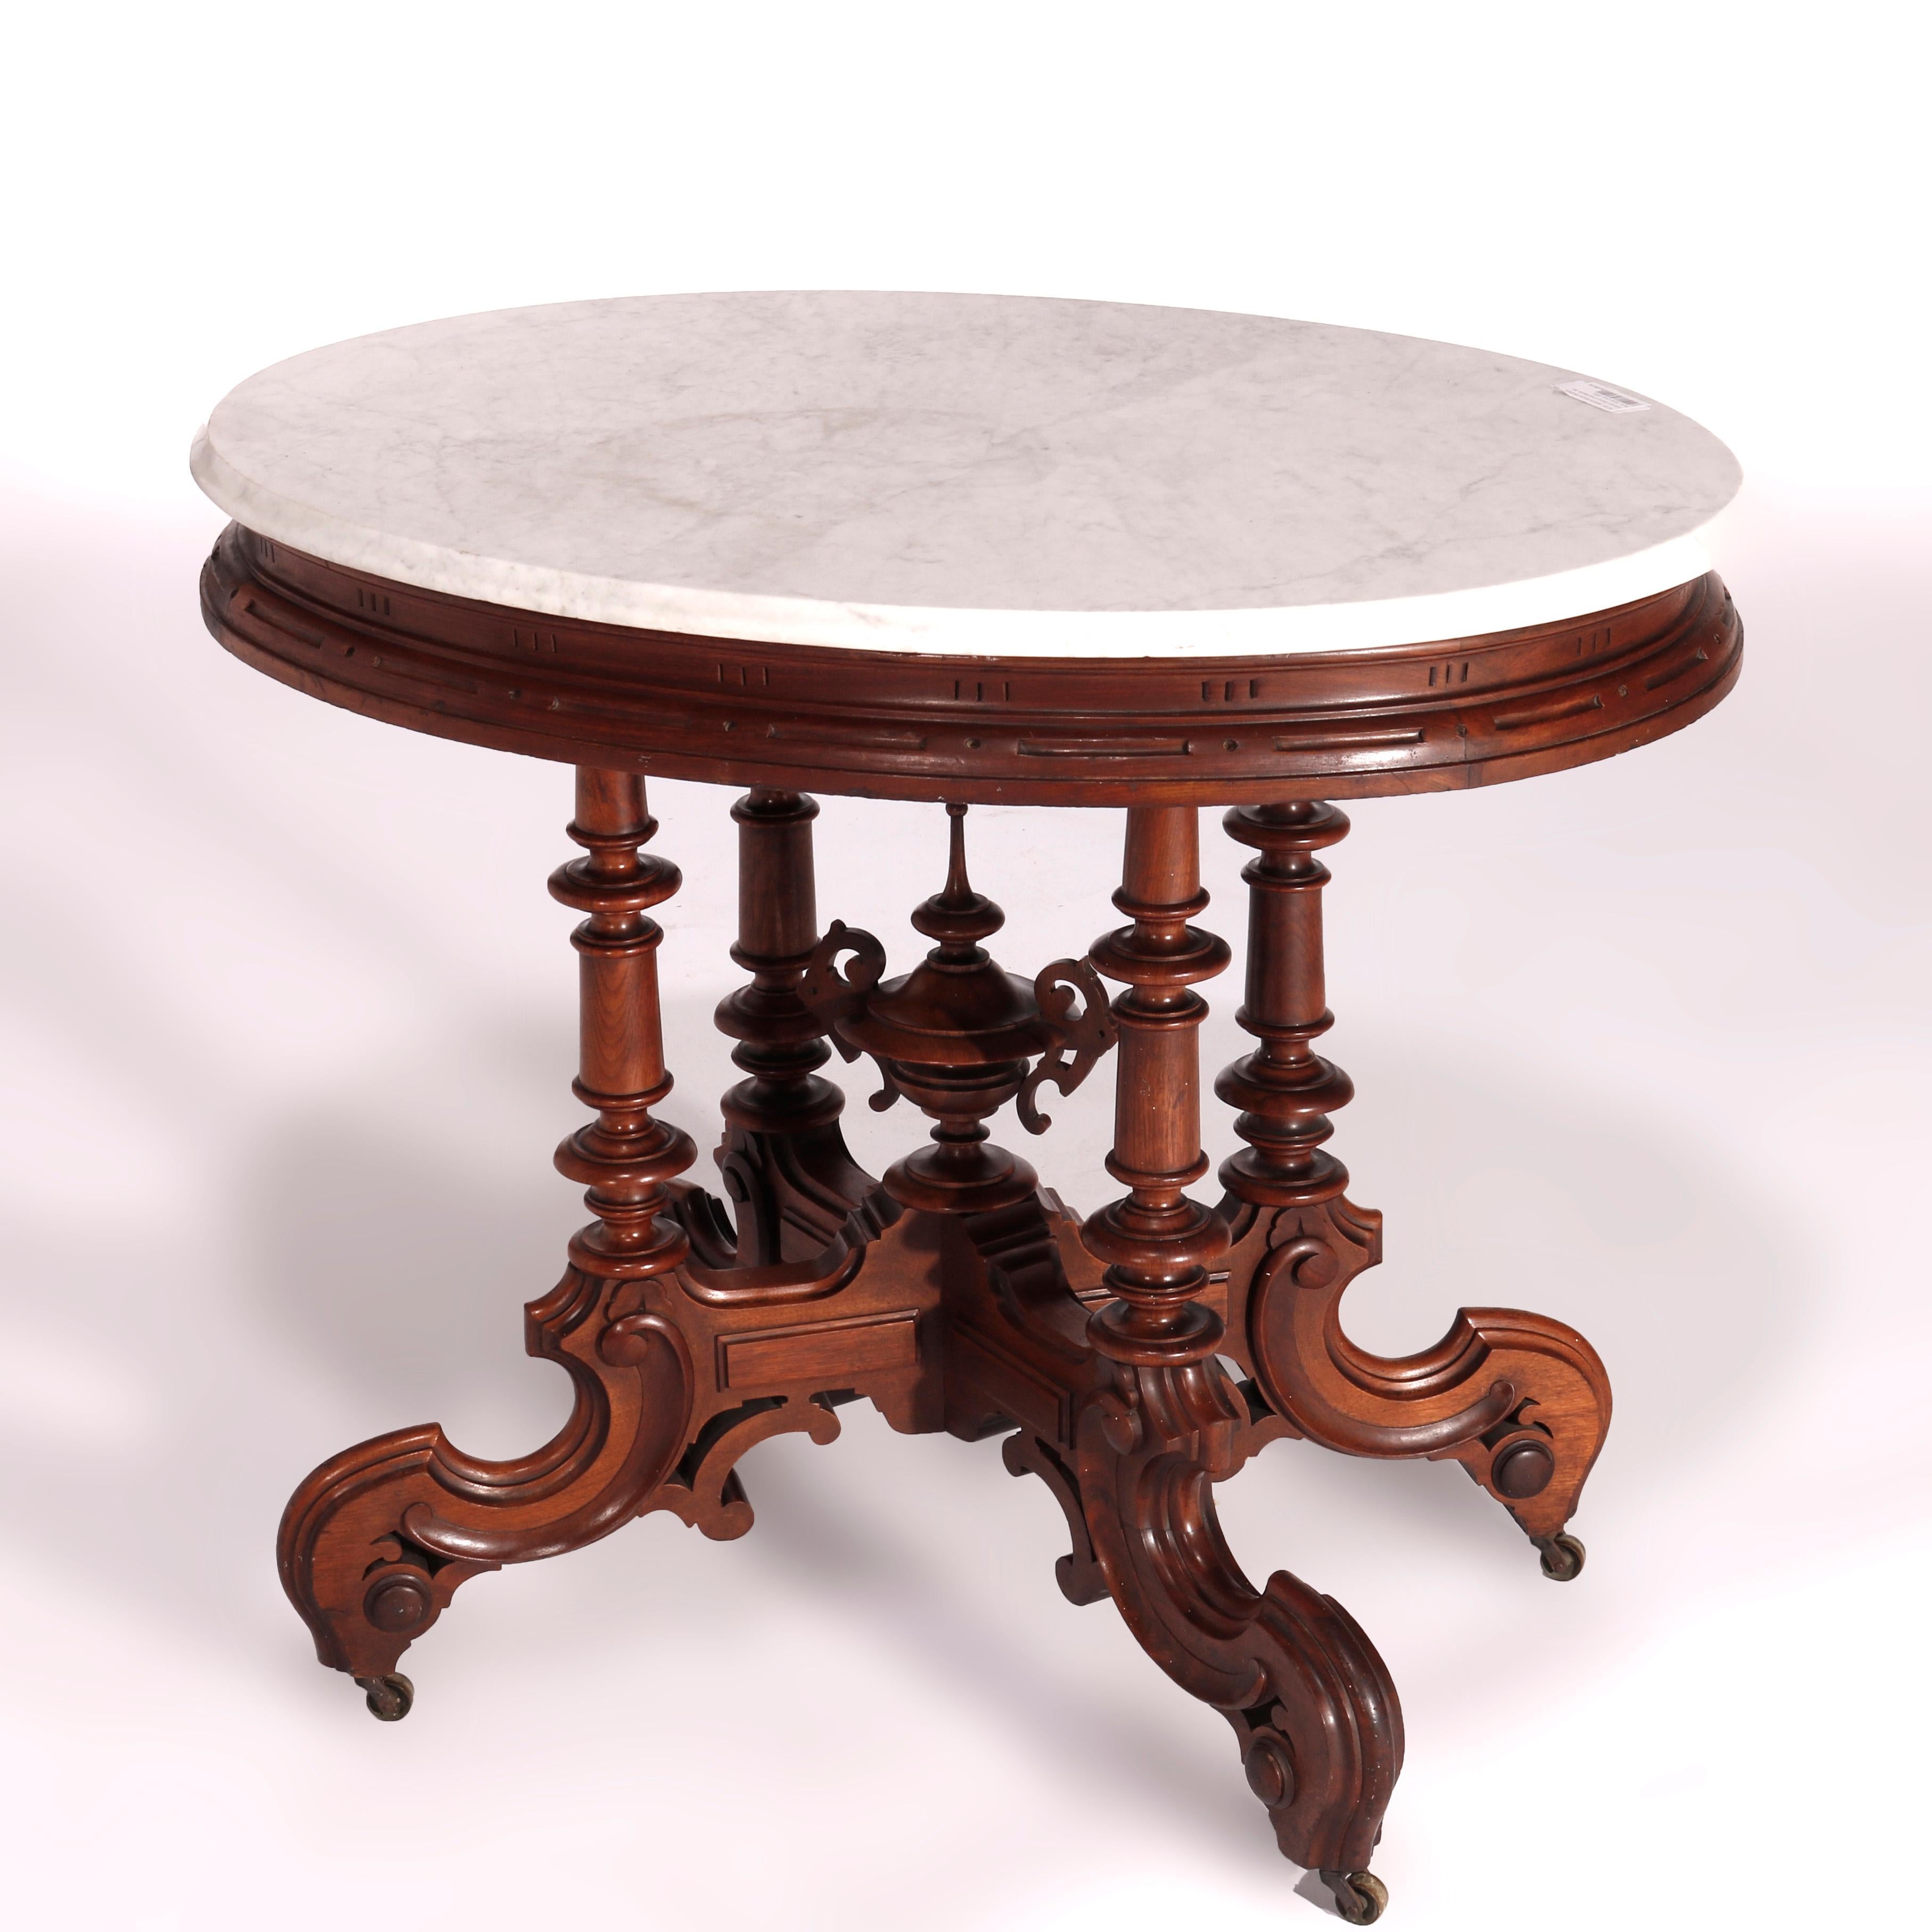 An antique Victorian Brooks Brothers parlor table offers beveled marble top over walnut base with four turned supports surrounding central carved urn form final, raised on scroll form legs, circa 1890

Measures - 31.5